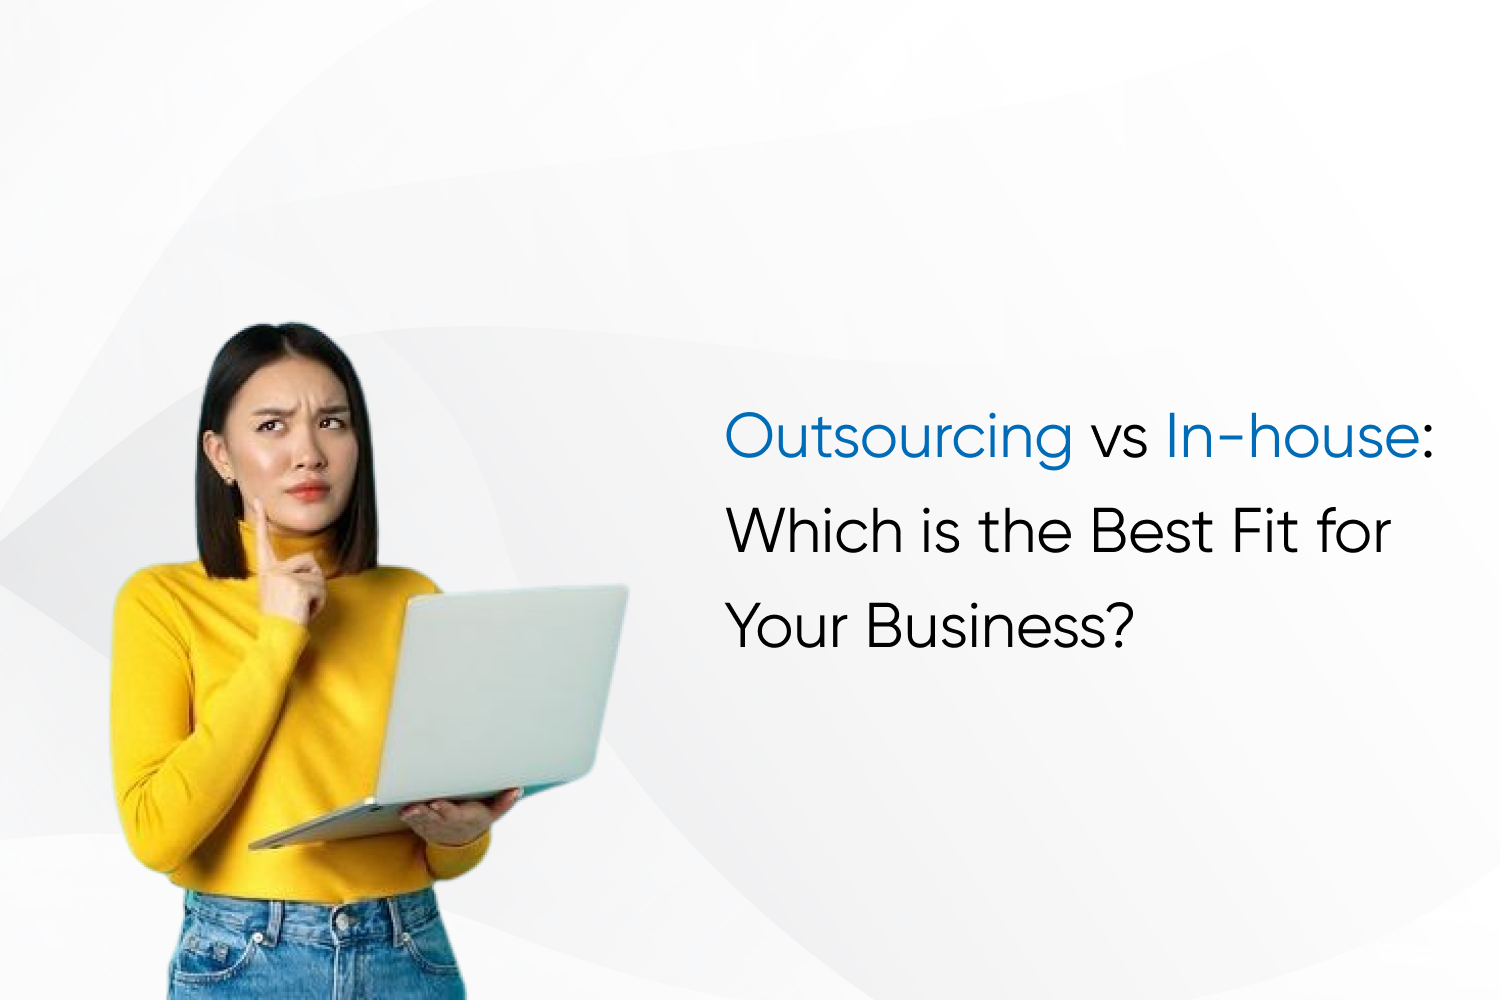 Outsourcing vs In-house: Which is the Best Fit for Your Business?